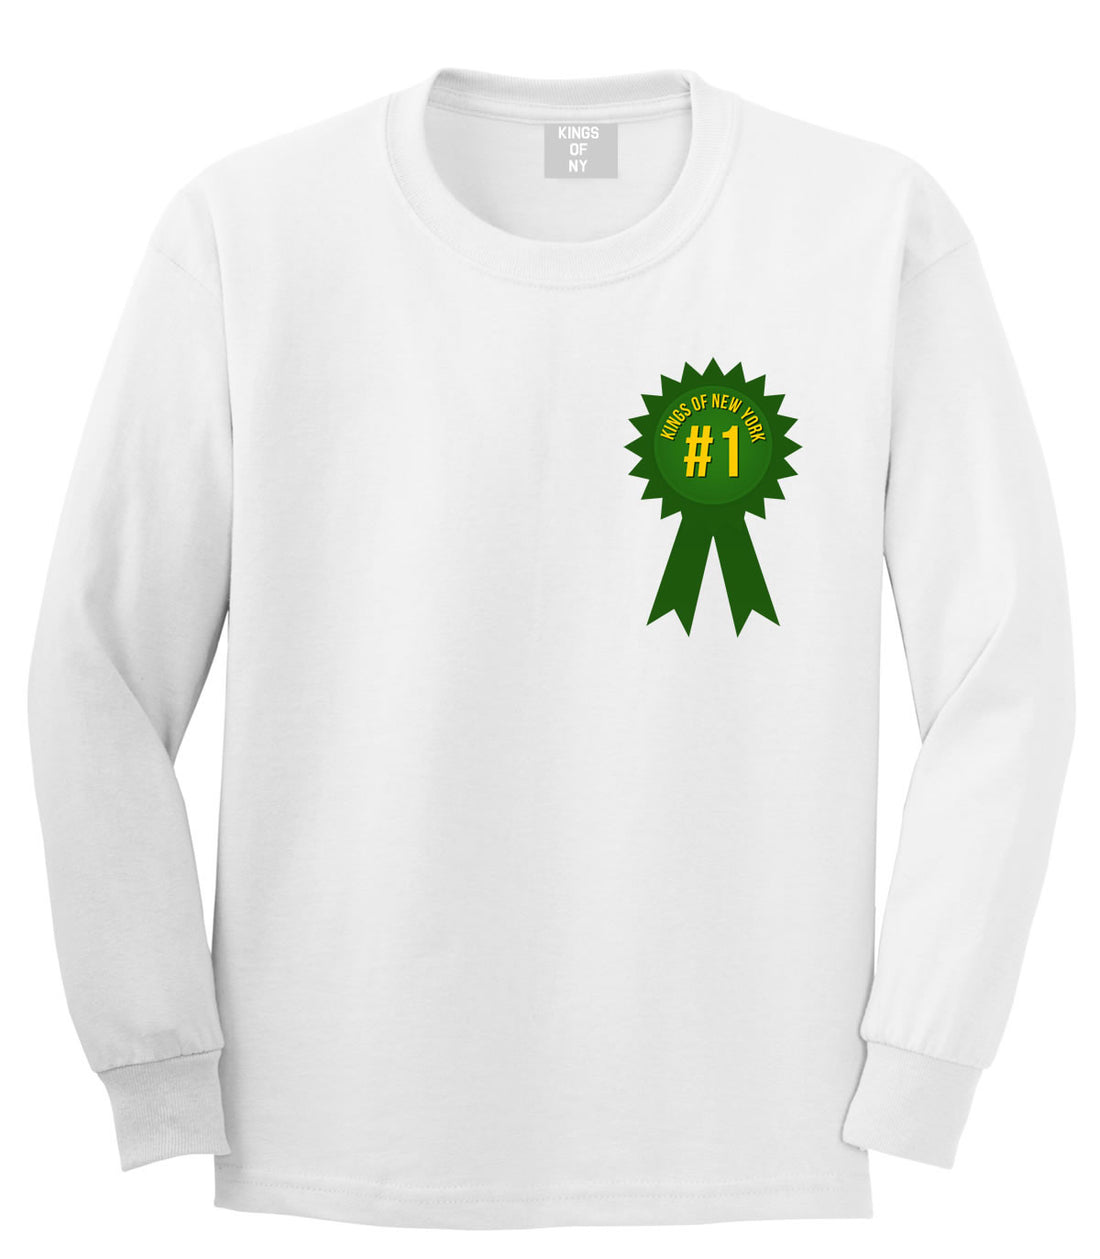 Grand Prize Champions Long Sleeve T-Shirt in White